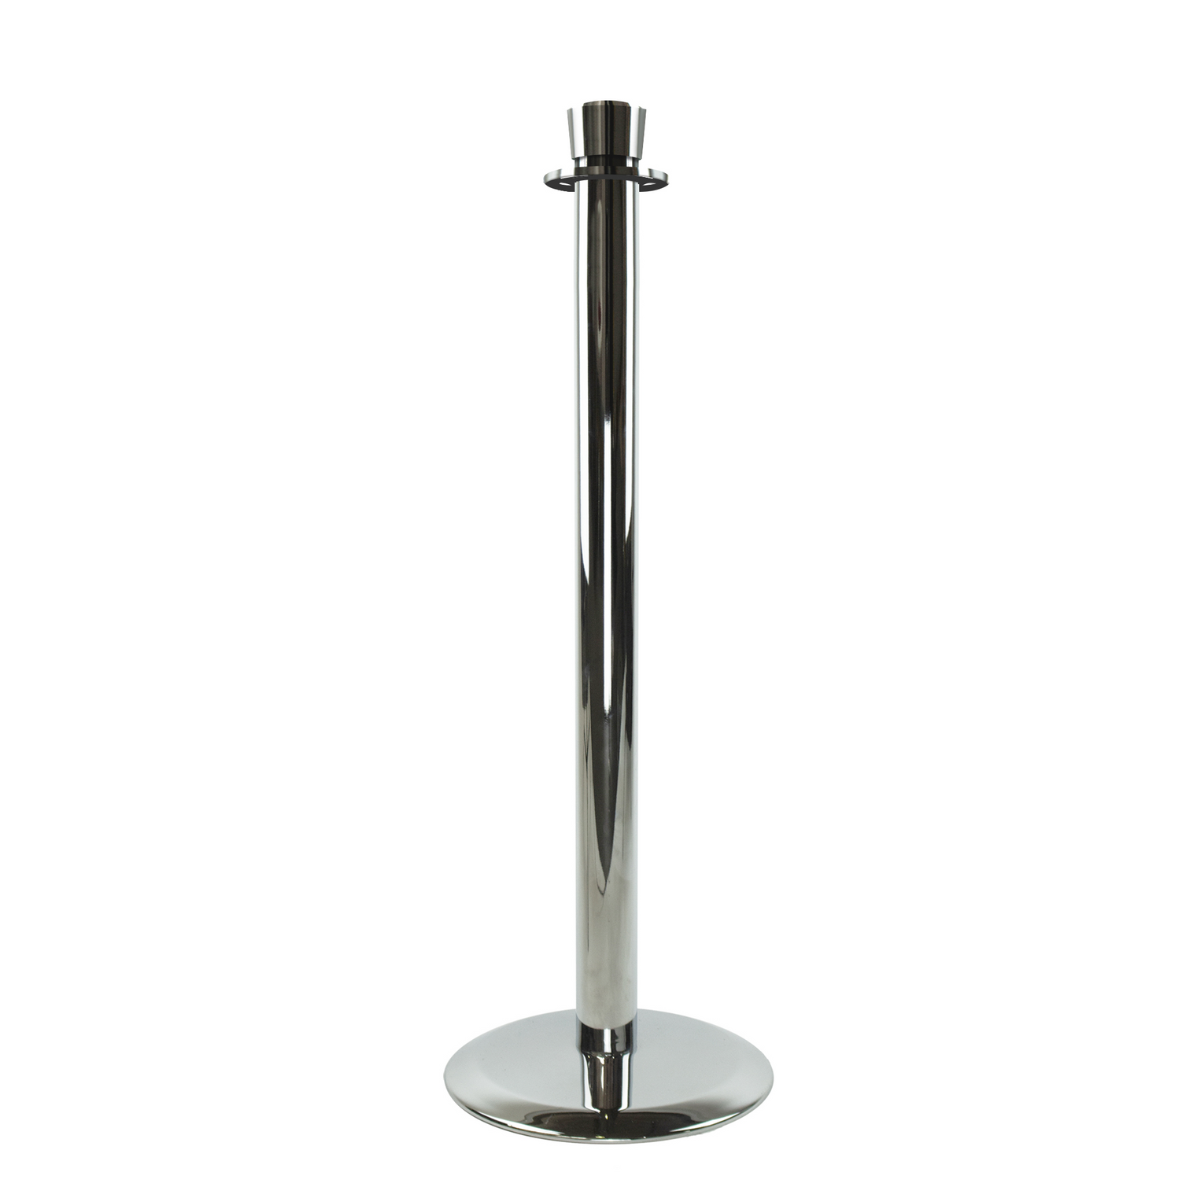 Post and rope stanchions, Classic Stanchions